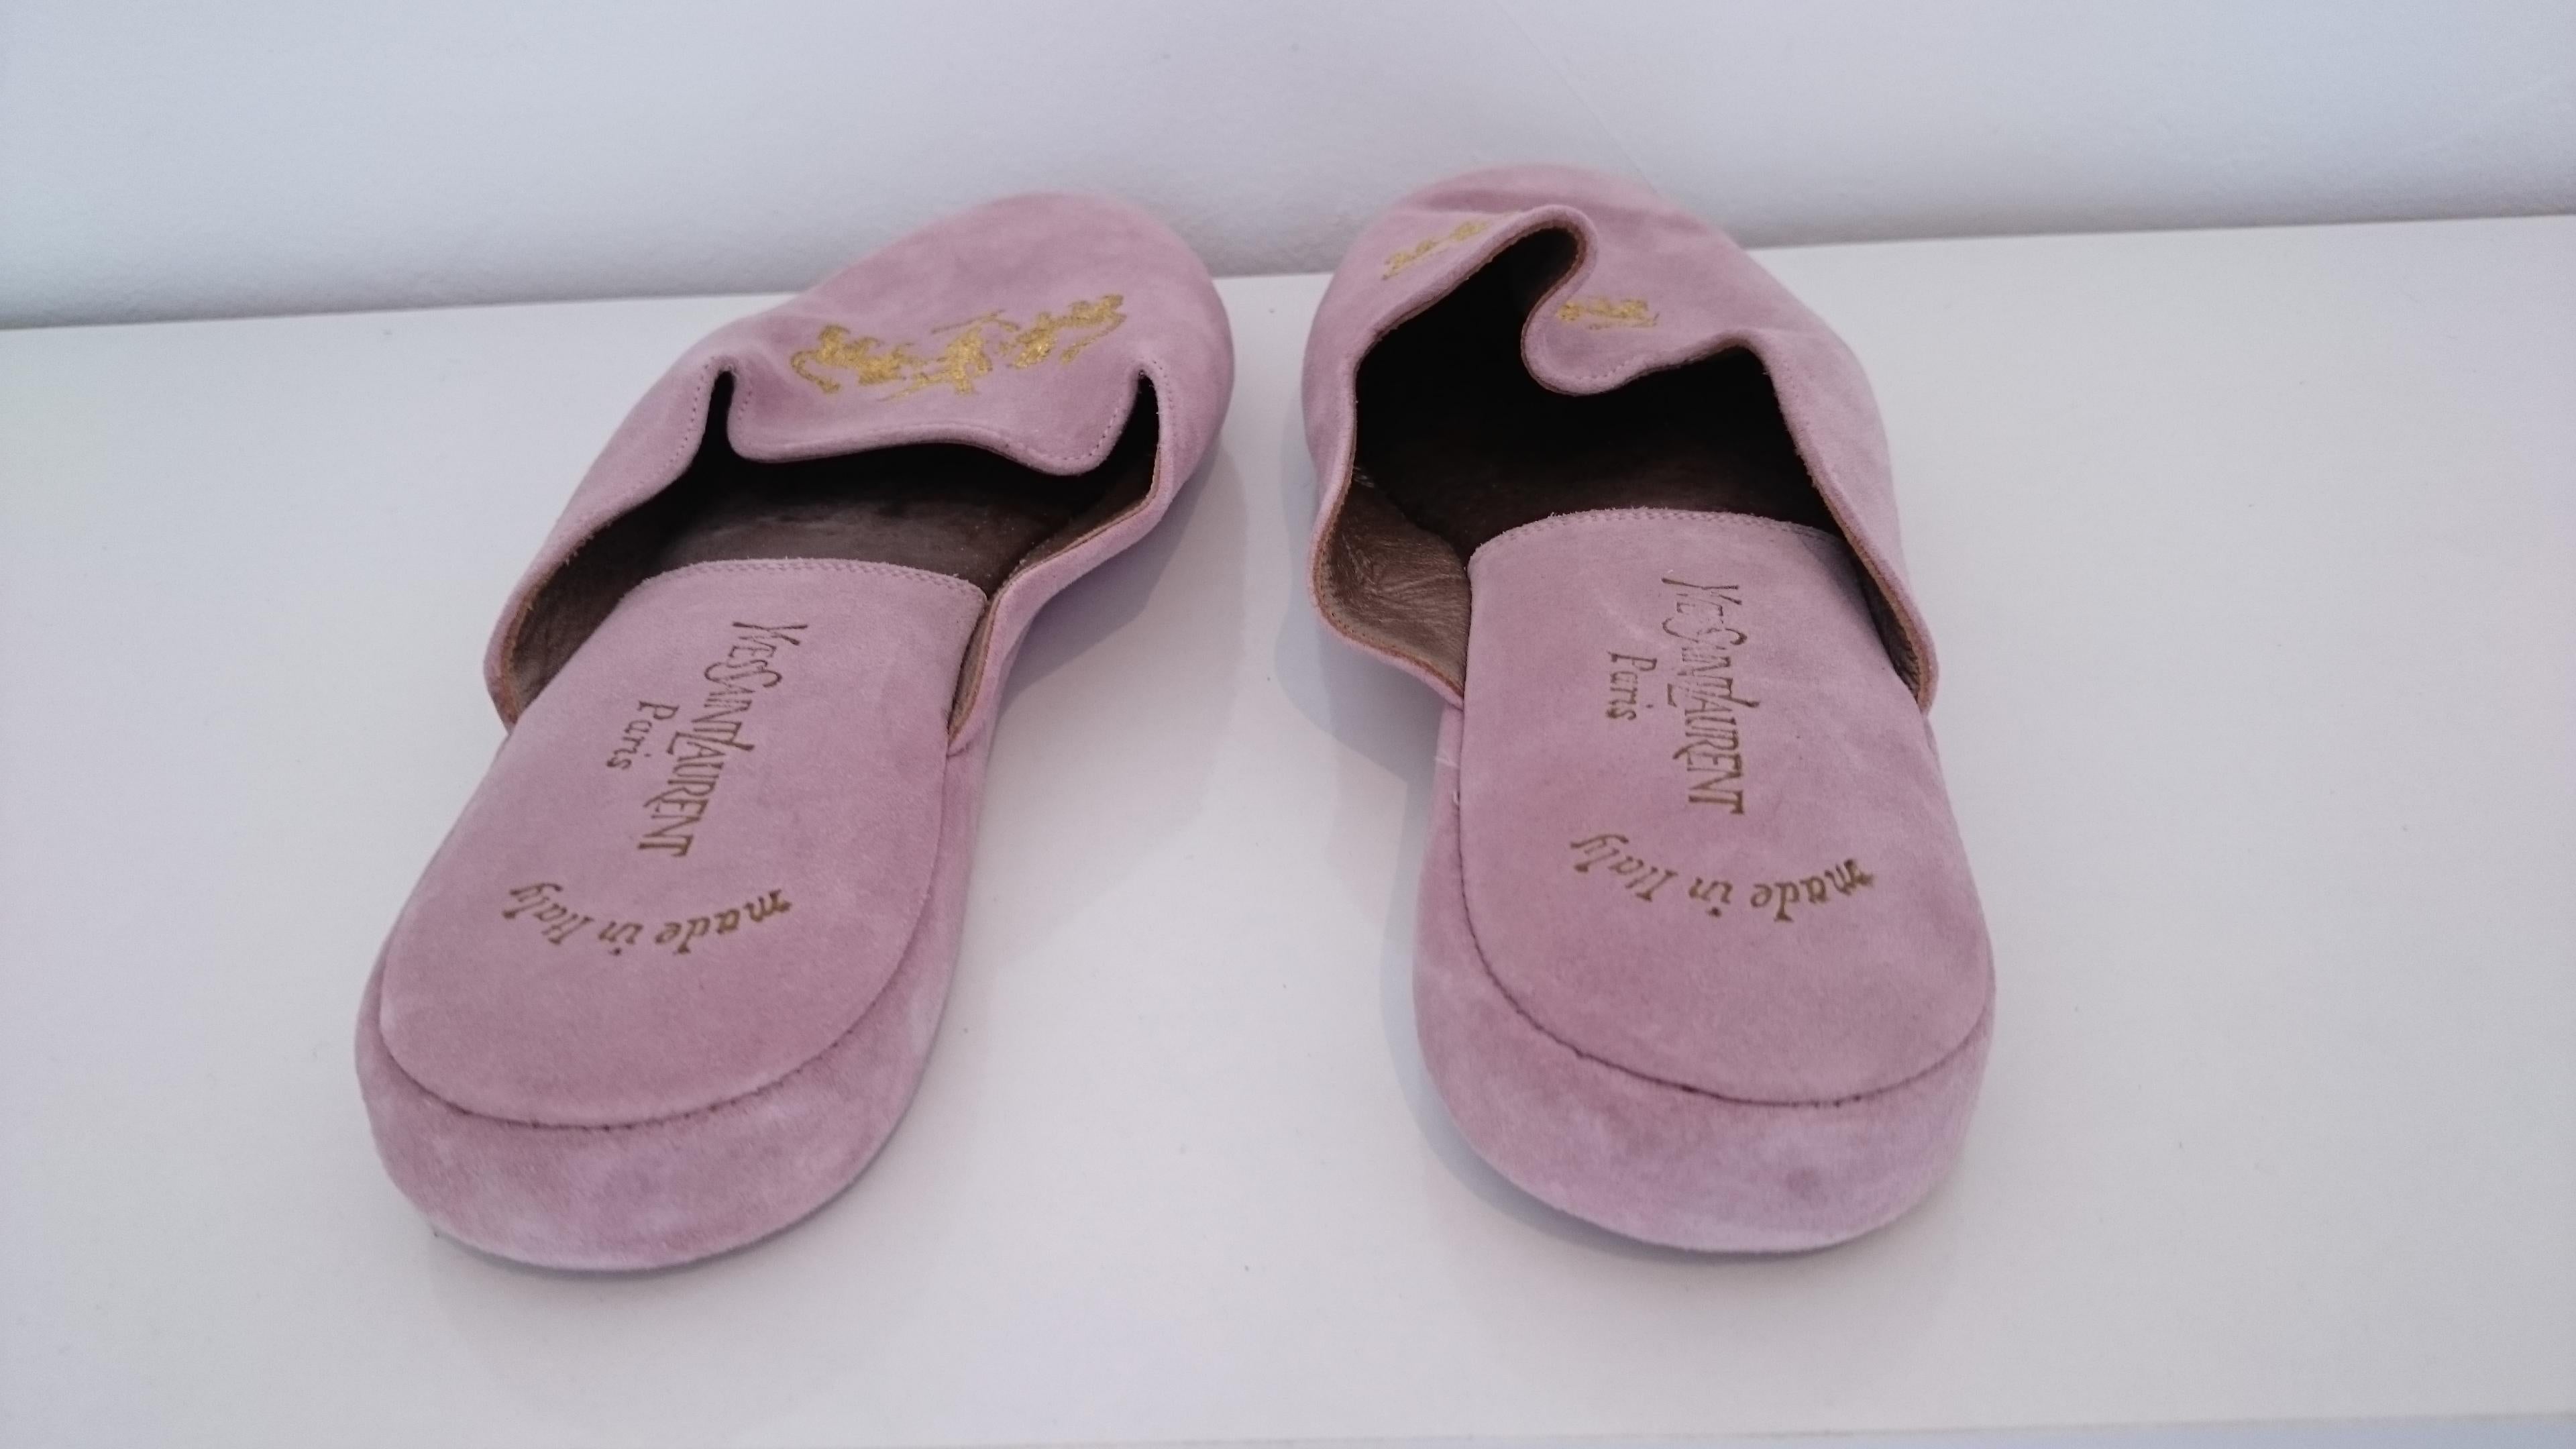 Yves Saint Laurent Pink Suede Slippers for Home. NEW. Size 10 1/2  im Angebot 1